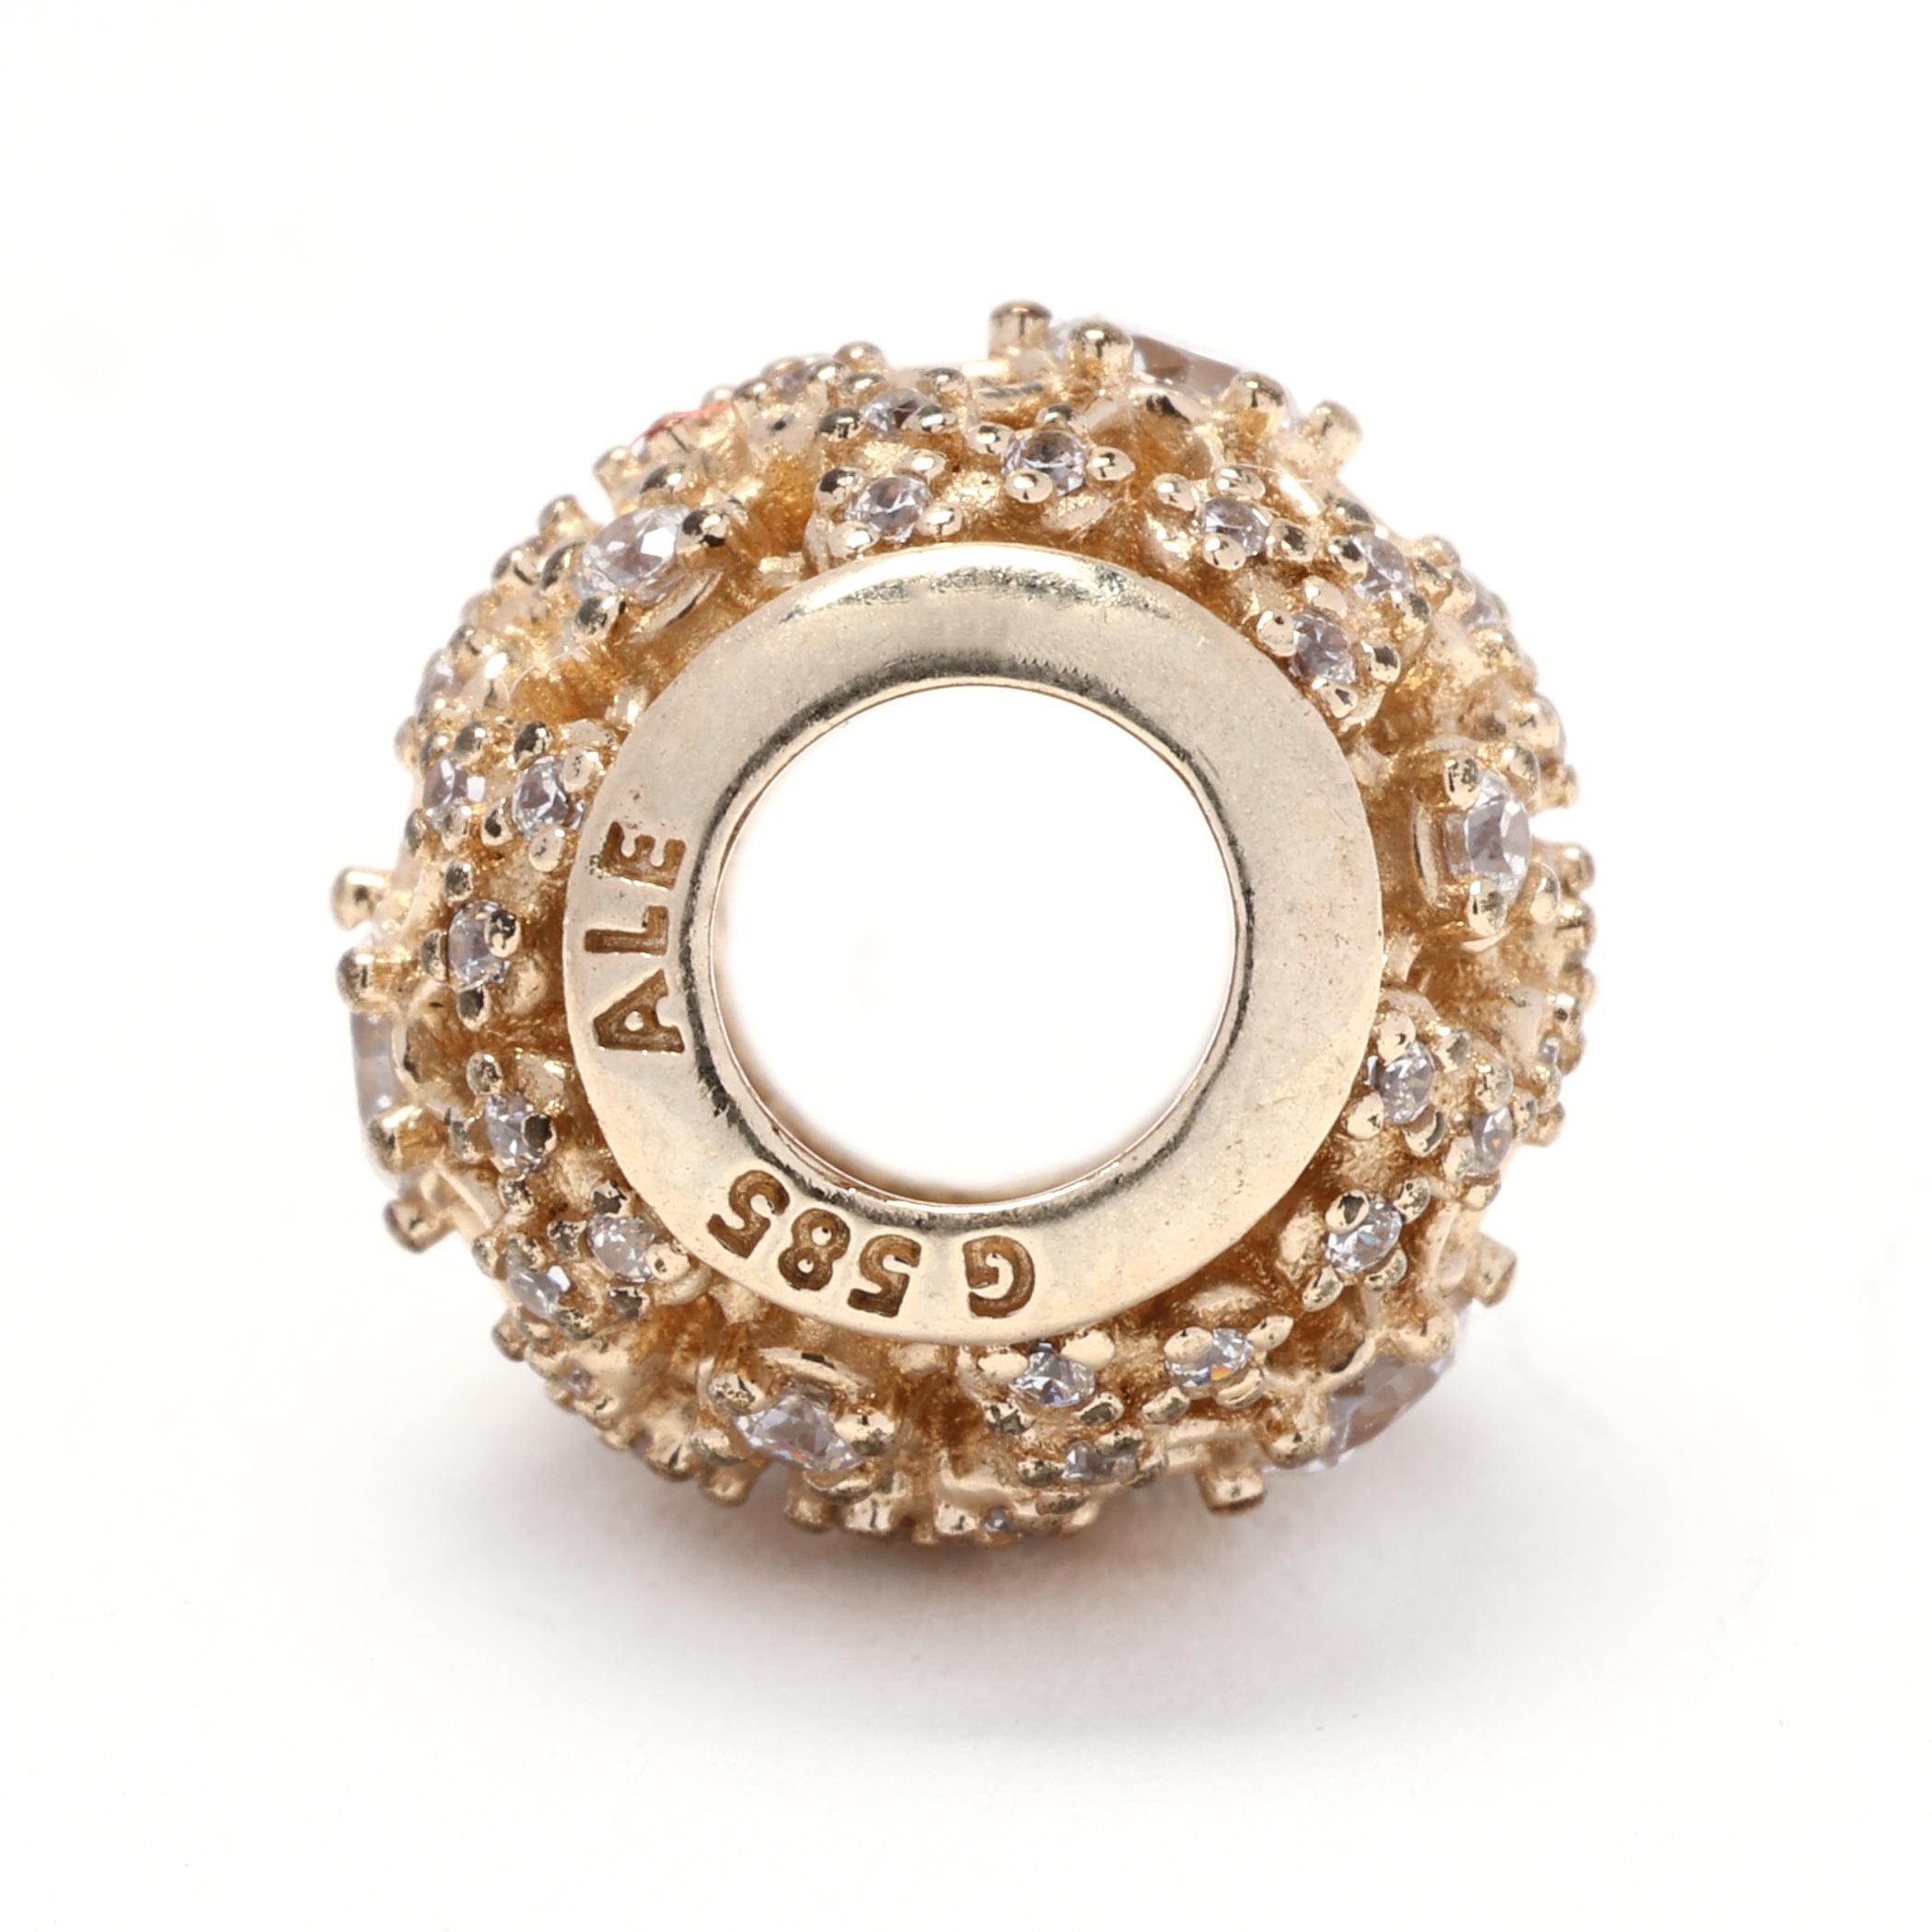 This gorgeous Pandora CZ Gold Charm is a stunning addition to your Pandora bracelet. It features a 14k yellow gold outer ring with a radiant CZ (cubic zirconia) center stone. The Inner Radiance charm is the perfect way to add a touch of elegance and